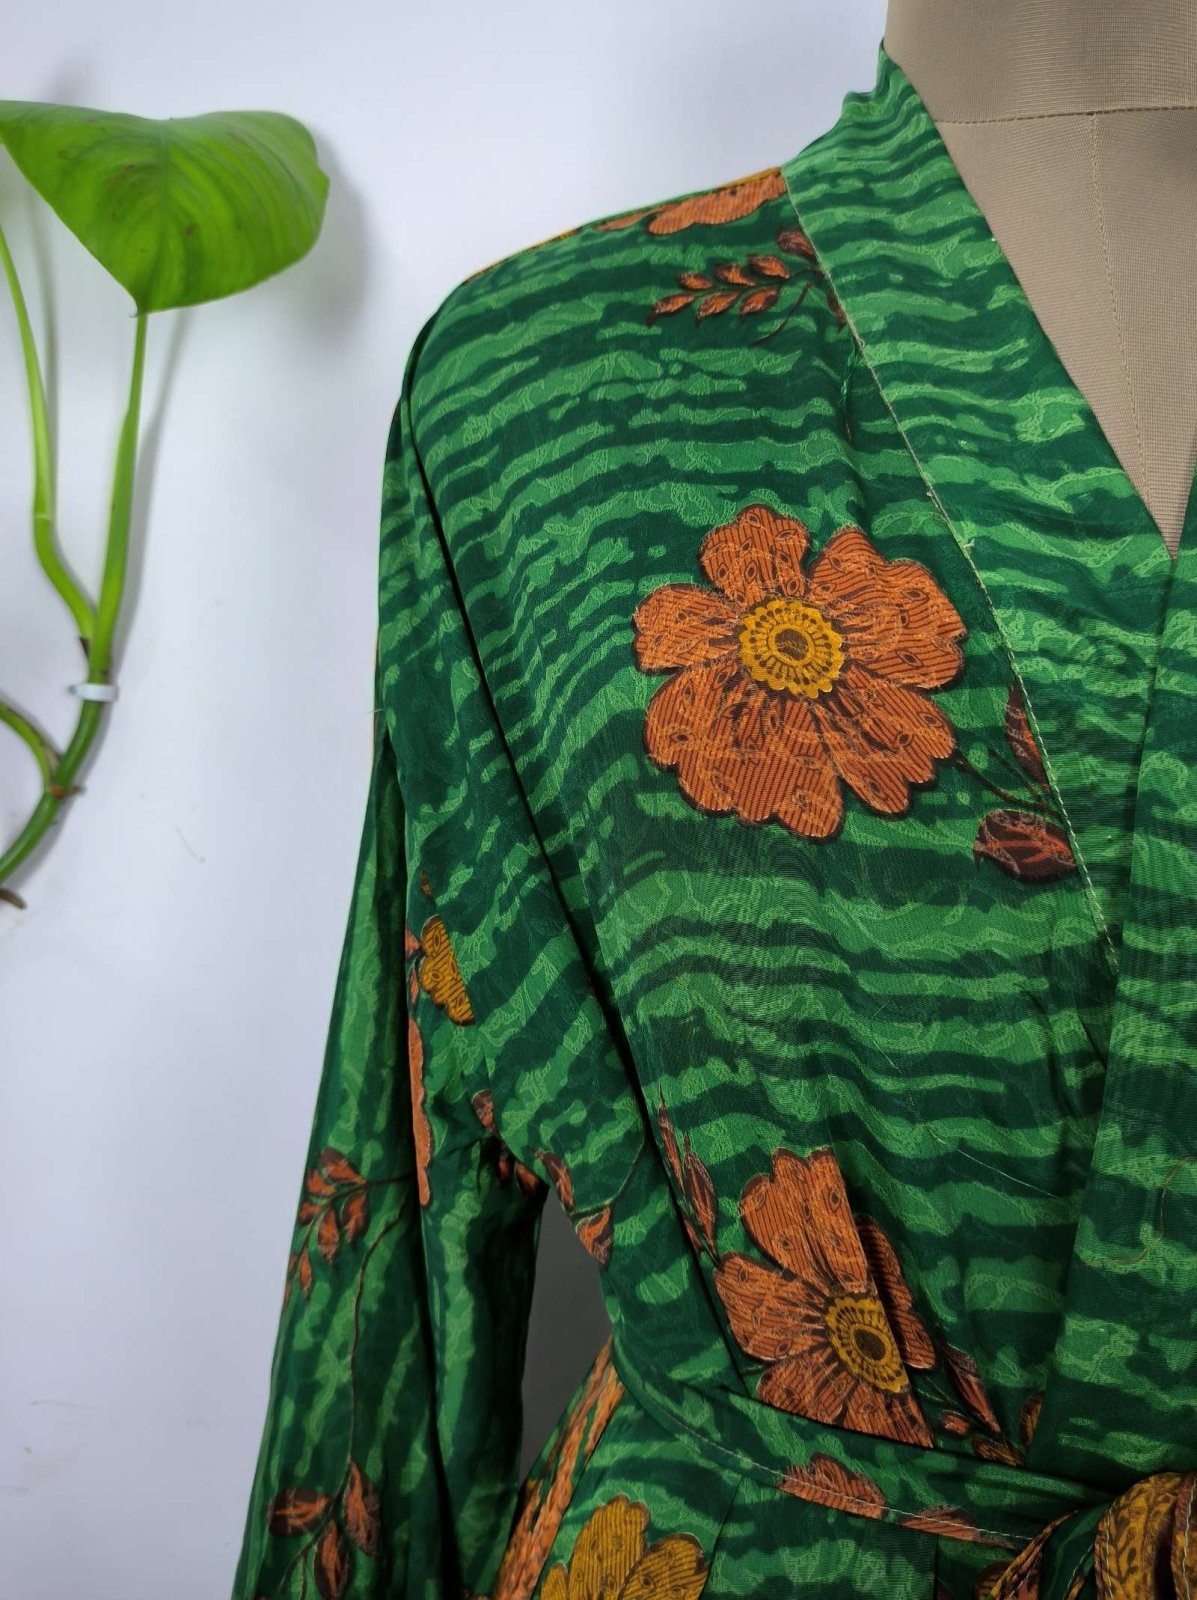 Upcycle Boho Chic Coverup Recycle Silk Sari Kimono Gorgeous Wardrobe Vintage Elegance House Robe | Duster Cardigan | Green Brown Floral - The Eastern Loom